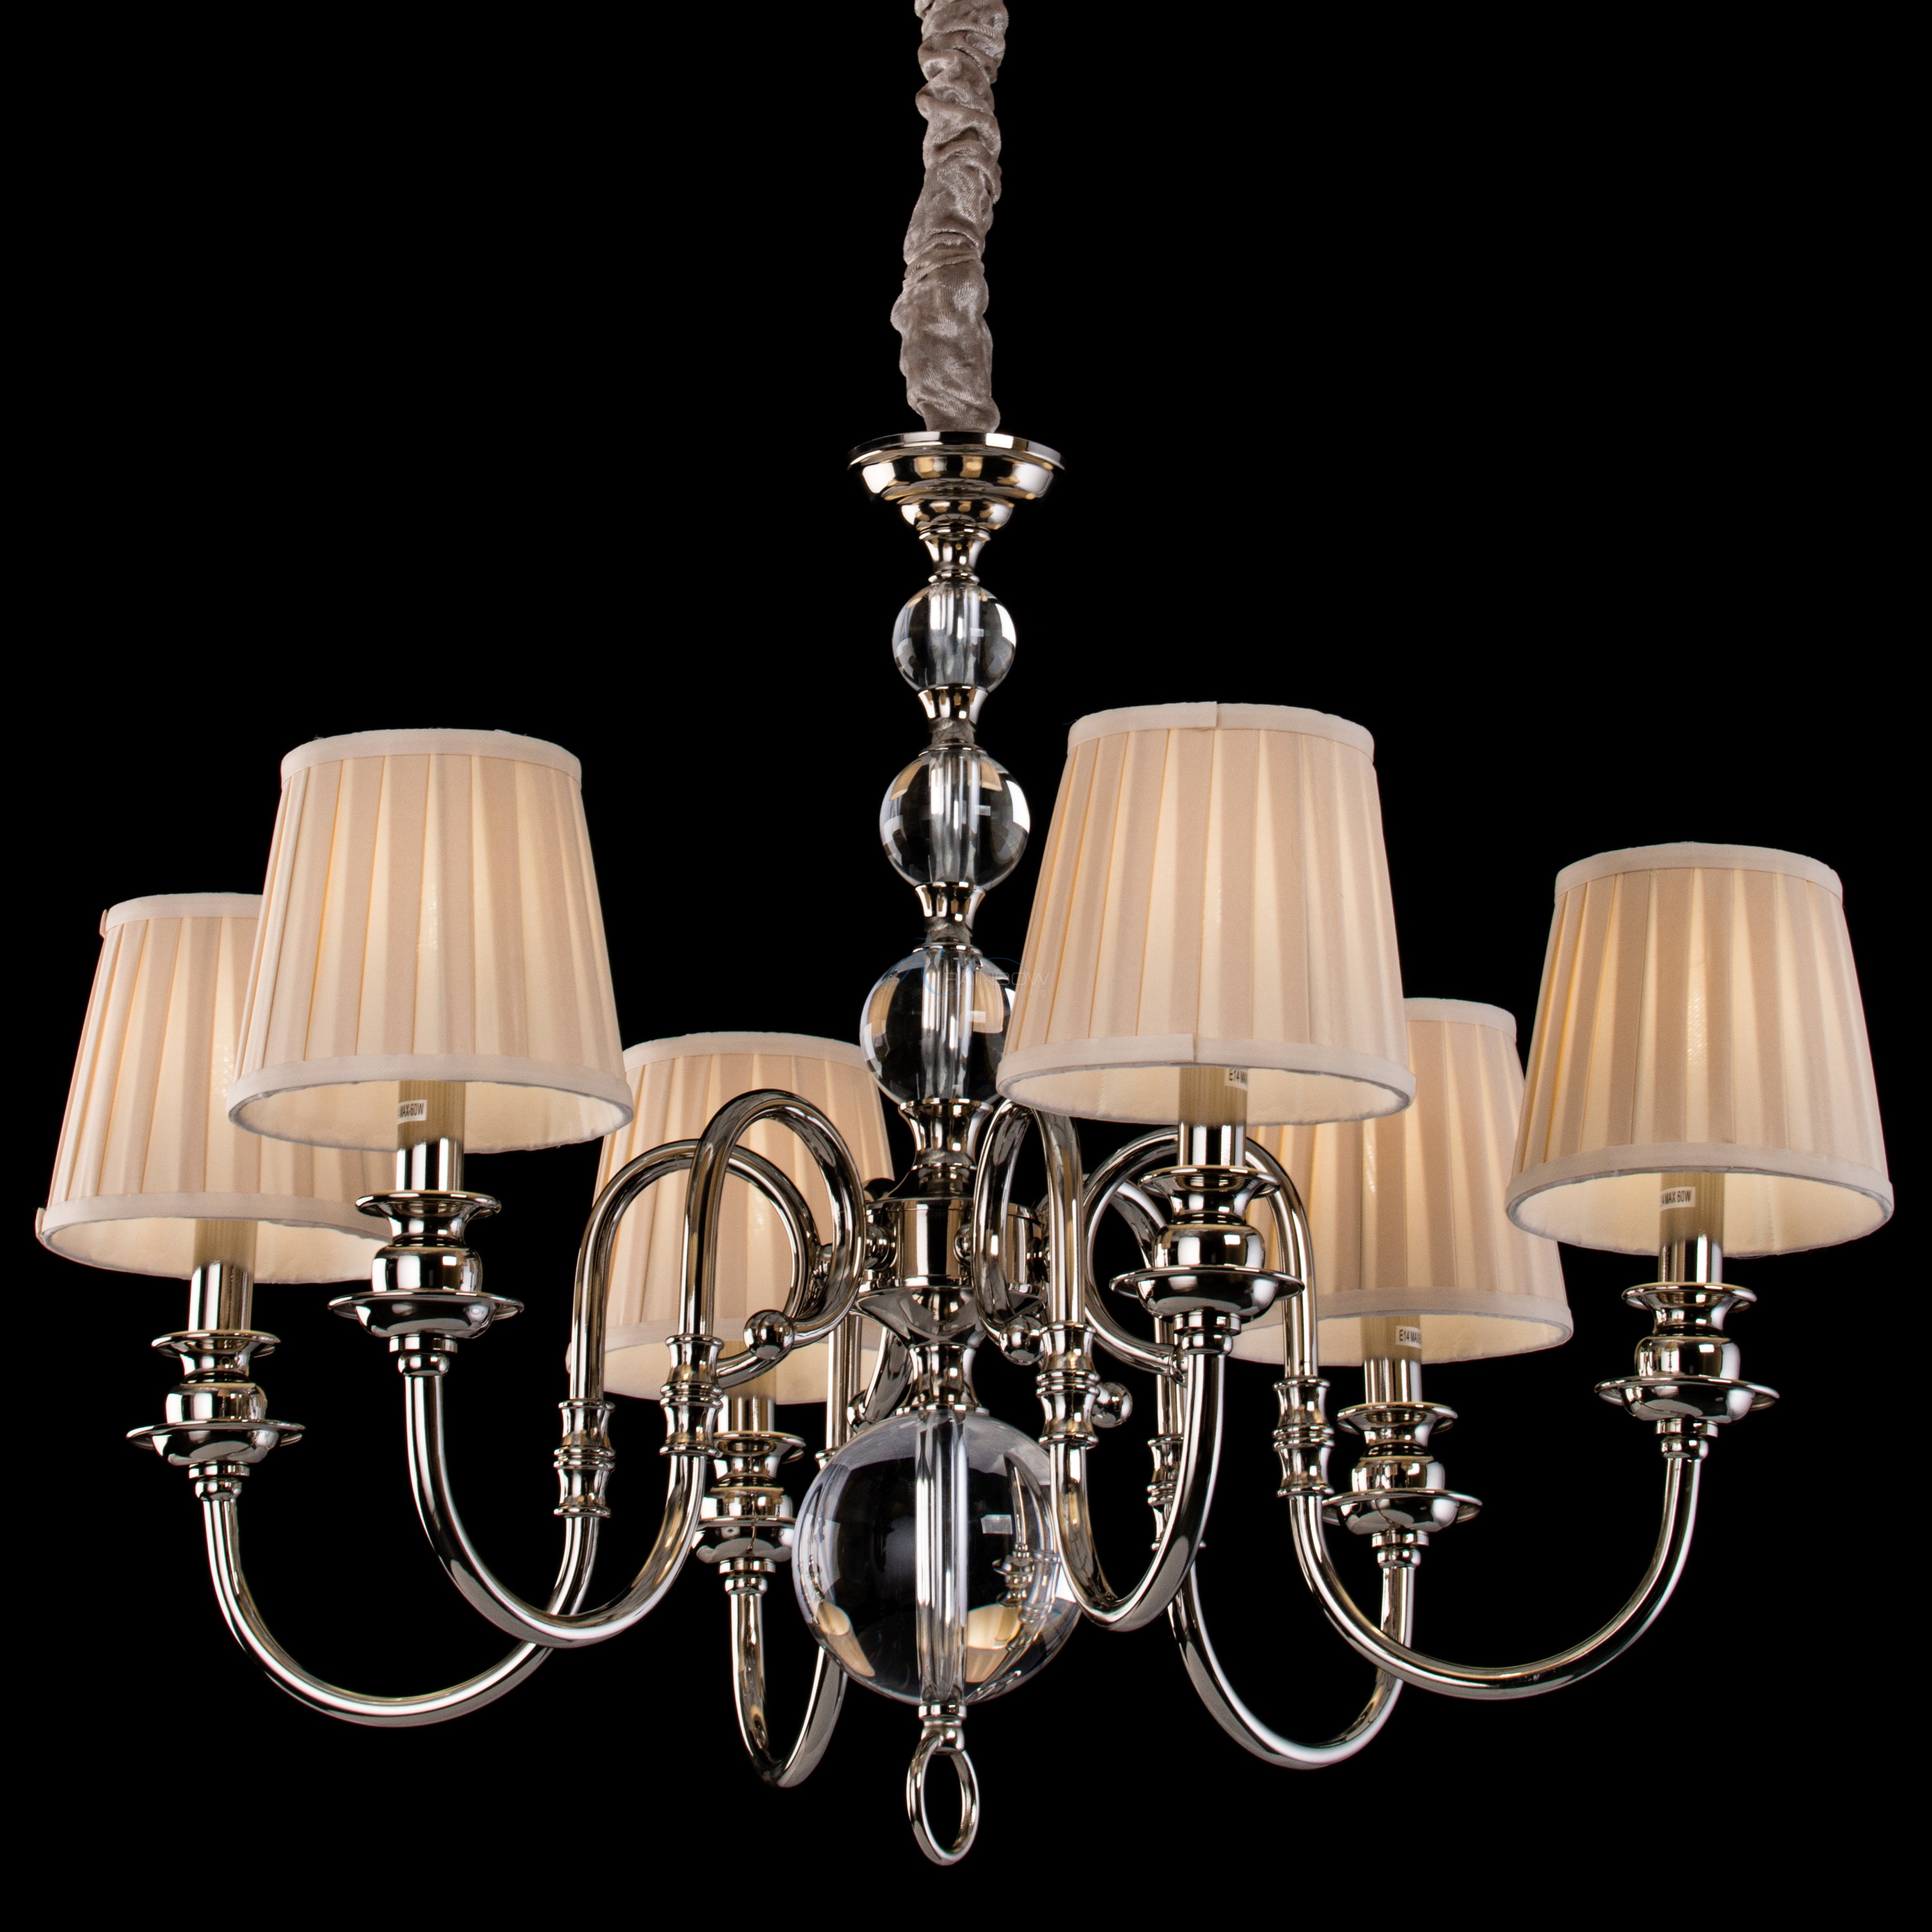 Chandeliers with lampshades